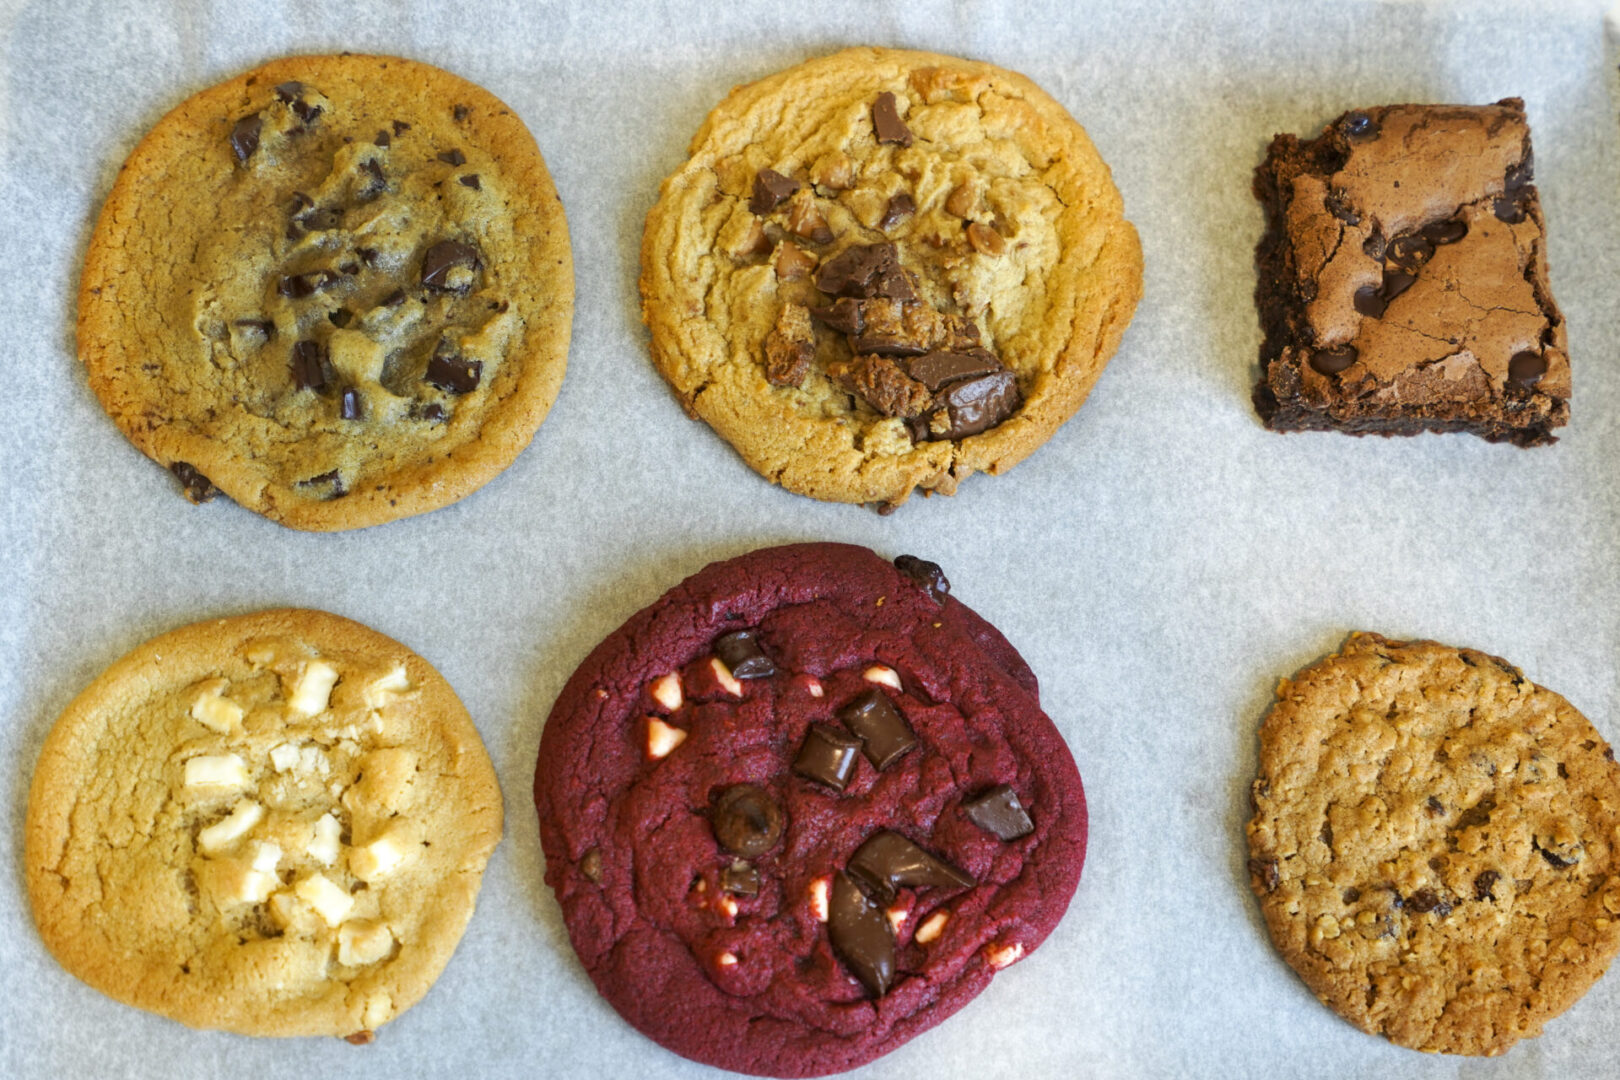 A variety of cookies are shown on the tray.